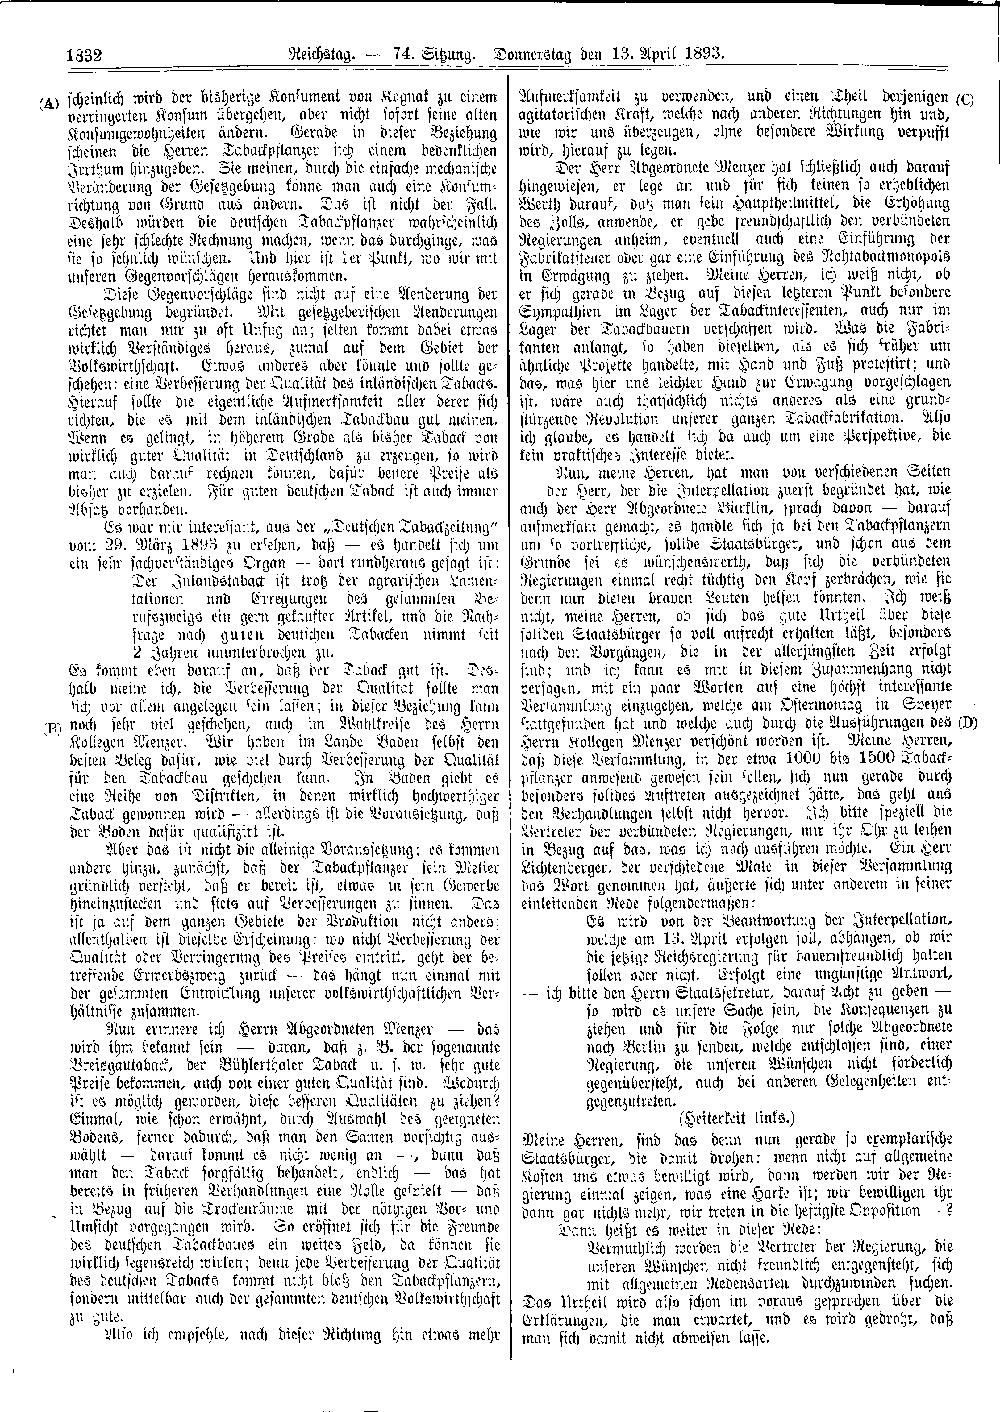 Scan of page 1832